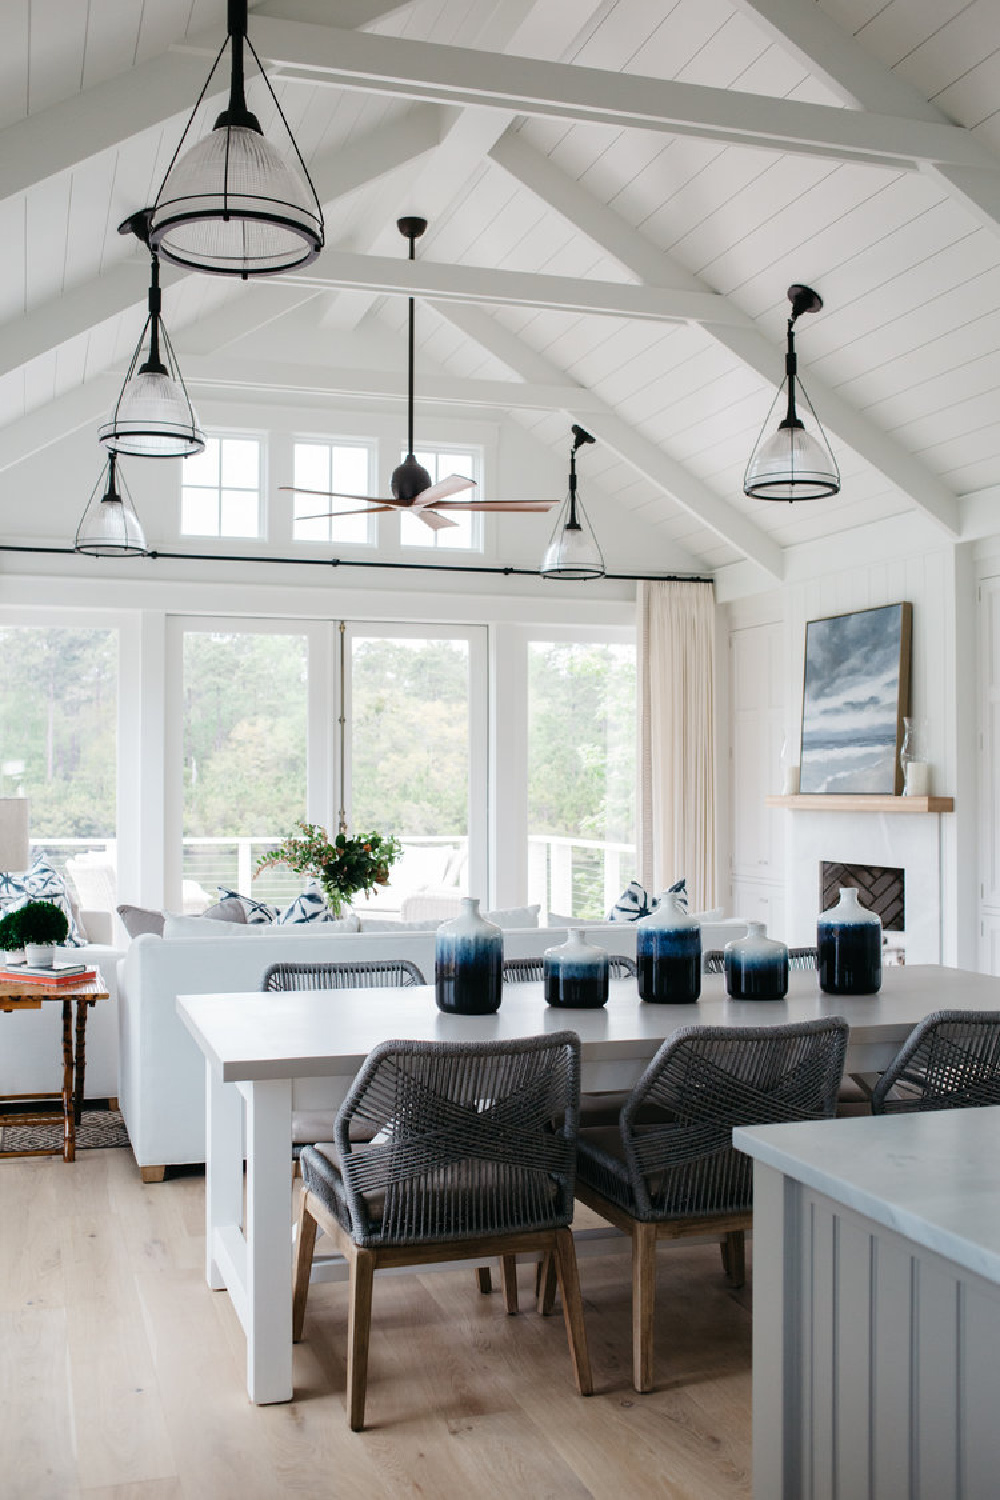 Coastal breezy style in a dining area open to a great room with shiplap in a board and batten coastal cottage. Interior design by Lisa Furey. #greatroom #shiplap #coastalstyle #coastalcottage #interiordesign